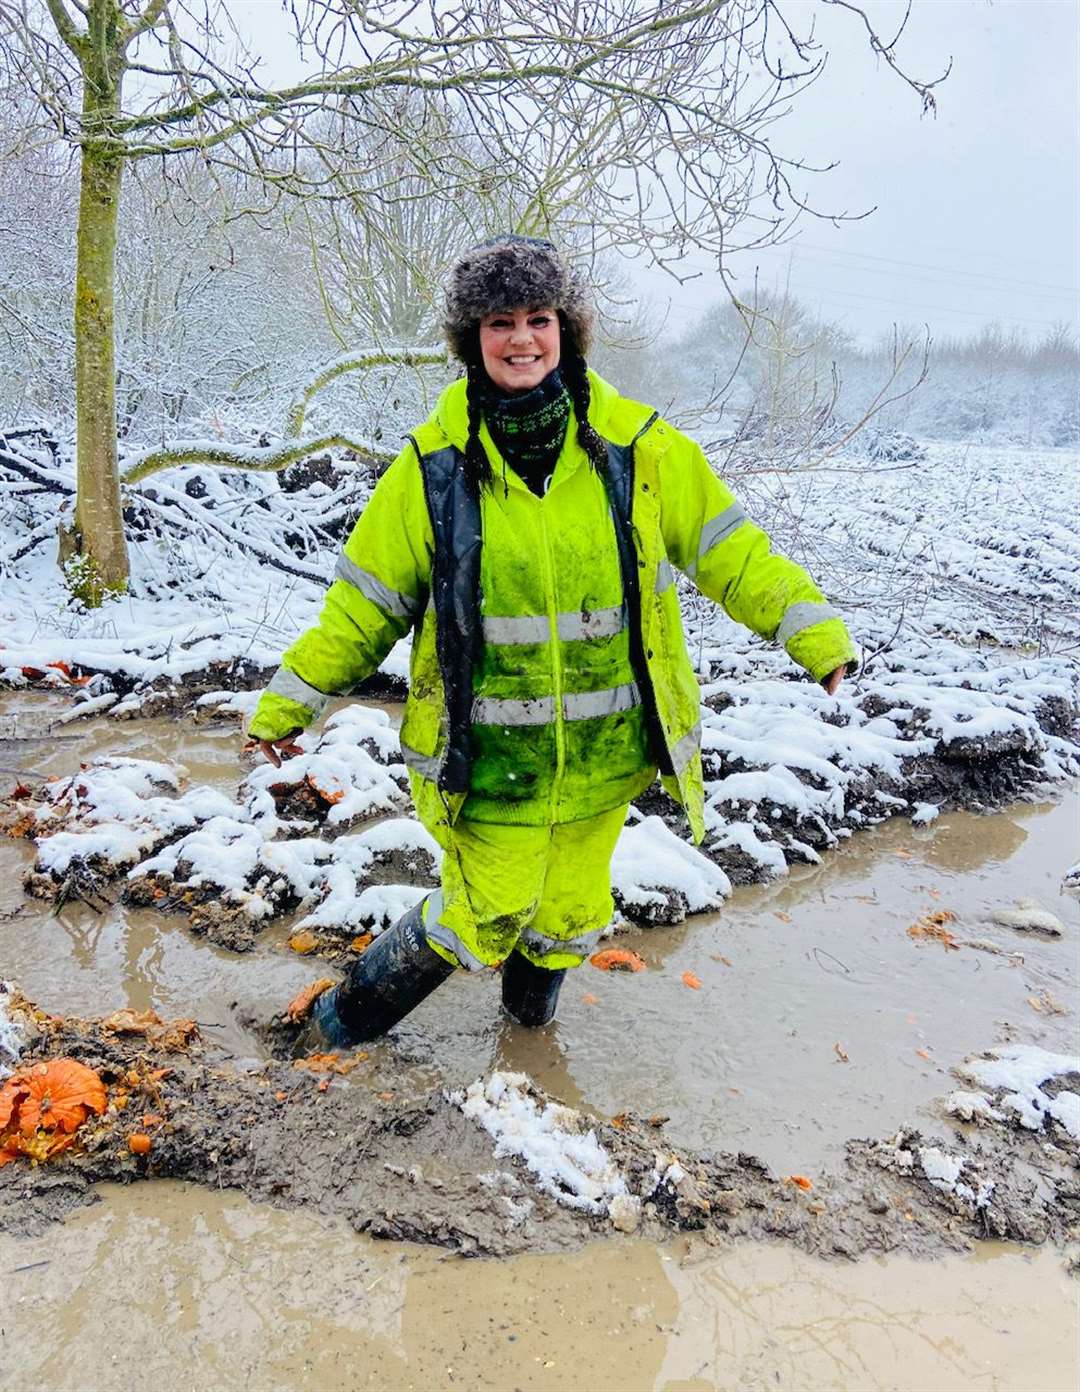 Amey James, founder of Happy Pants Ranch animal sanctuary, in the mud when she first took over the 20-acre site at Iwade Road, Bobbing a year ago